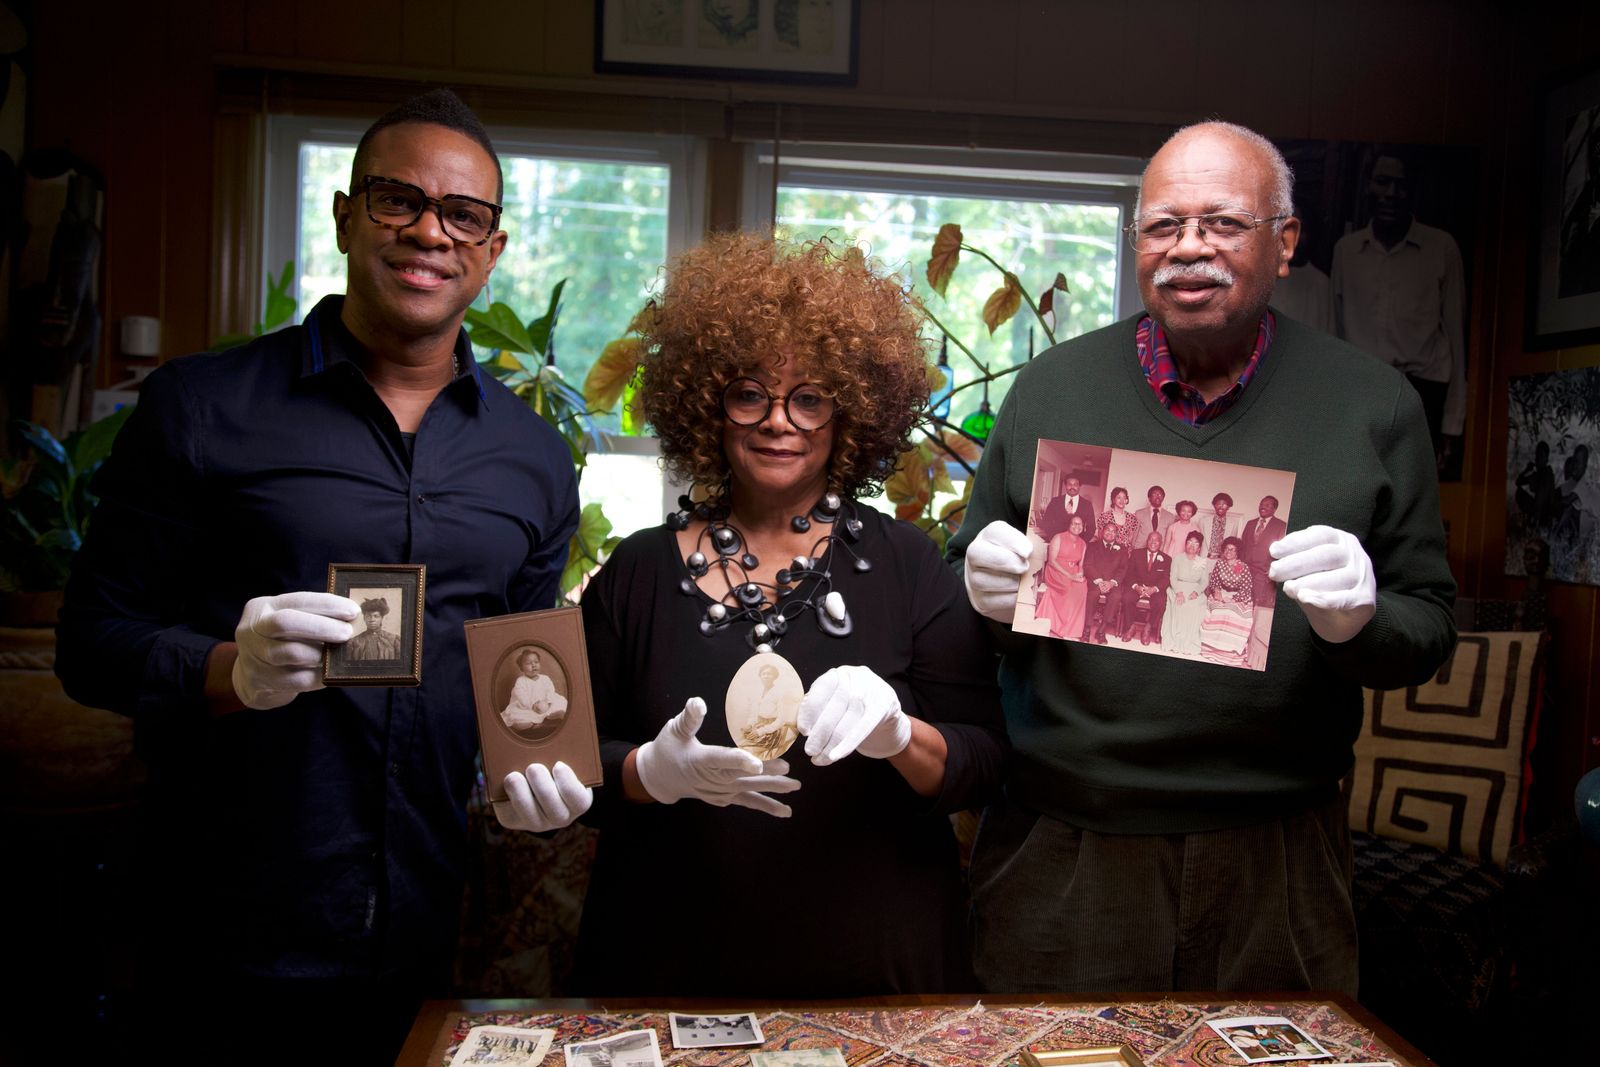 'Family Pictures USA'  artist Thomas Allen Harris, left, a Black man with glasses and a blue button-down shirt, displays family photographs belonging to North Carolina Poet Laureate Jaki Shelton Green, a Black woman with copper-colored curly hair. round glasses and a black dress, and  her cousin, Sterling Michael Holt., a Black man with white hair and white mustache, glasses, waring a green sweater and holding a family photograph.   Harris' 'Family Pictures USA' project co-creates a living and growing family picture album of America by traveling across the country and inviting community members to share images and stories from their personal family archives.  Photo courtesy of Thomas Allen Harris. 